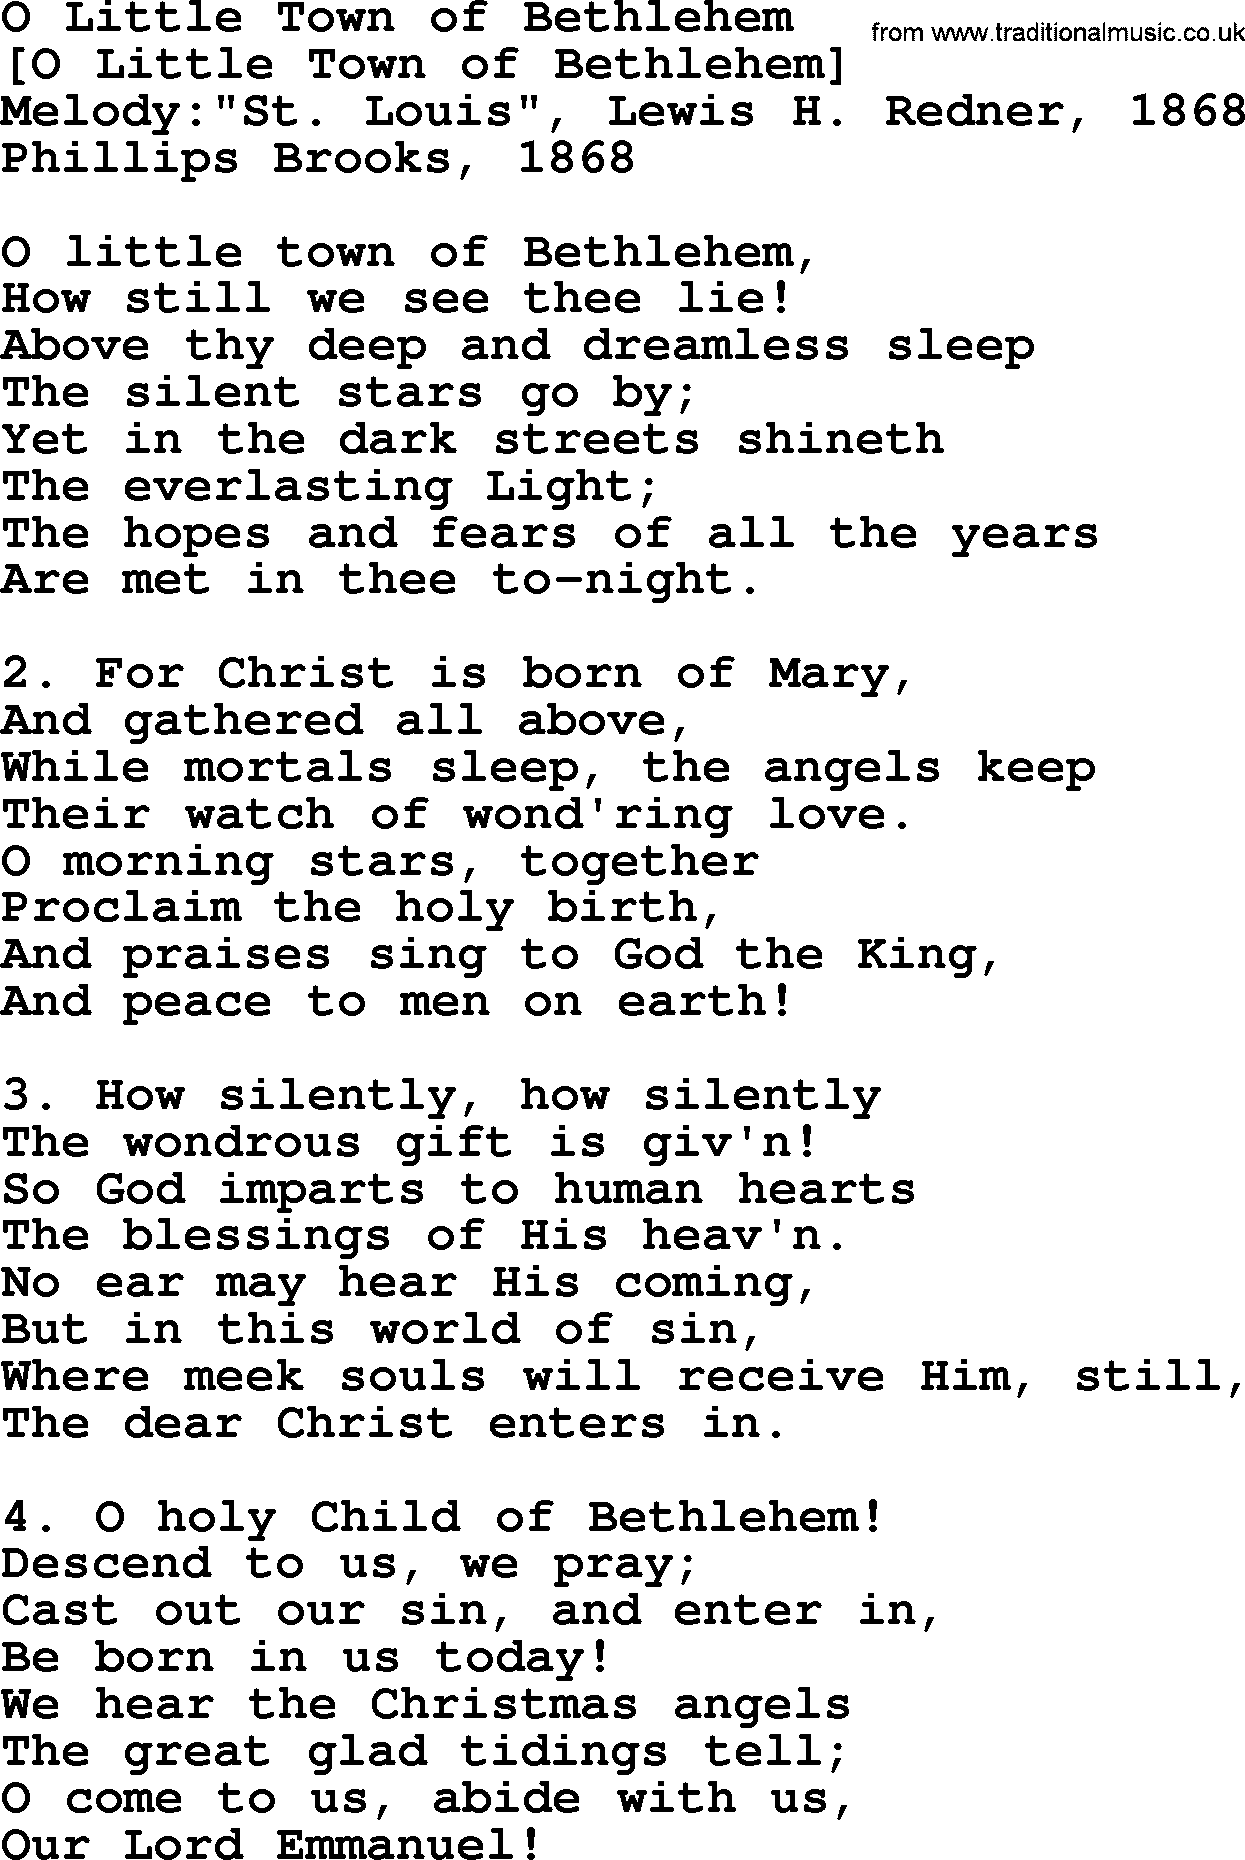 Old English Song Lyrics for O Little Town Of Bethlehem, with PDF